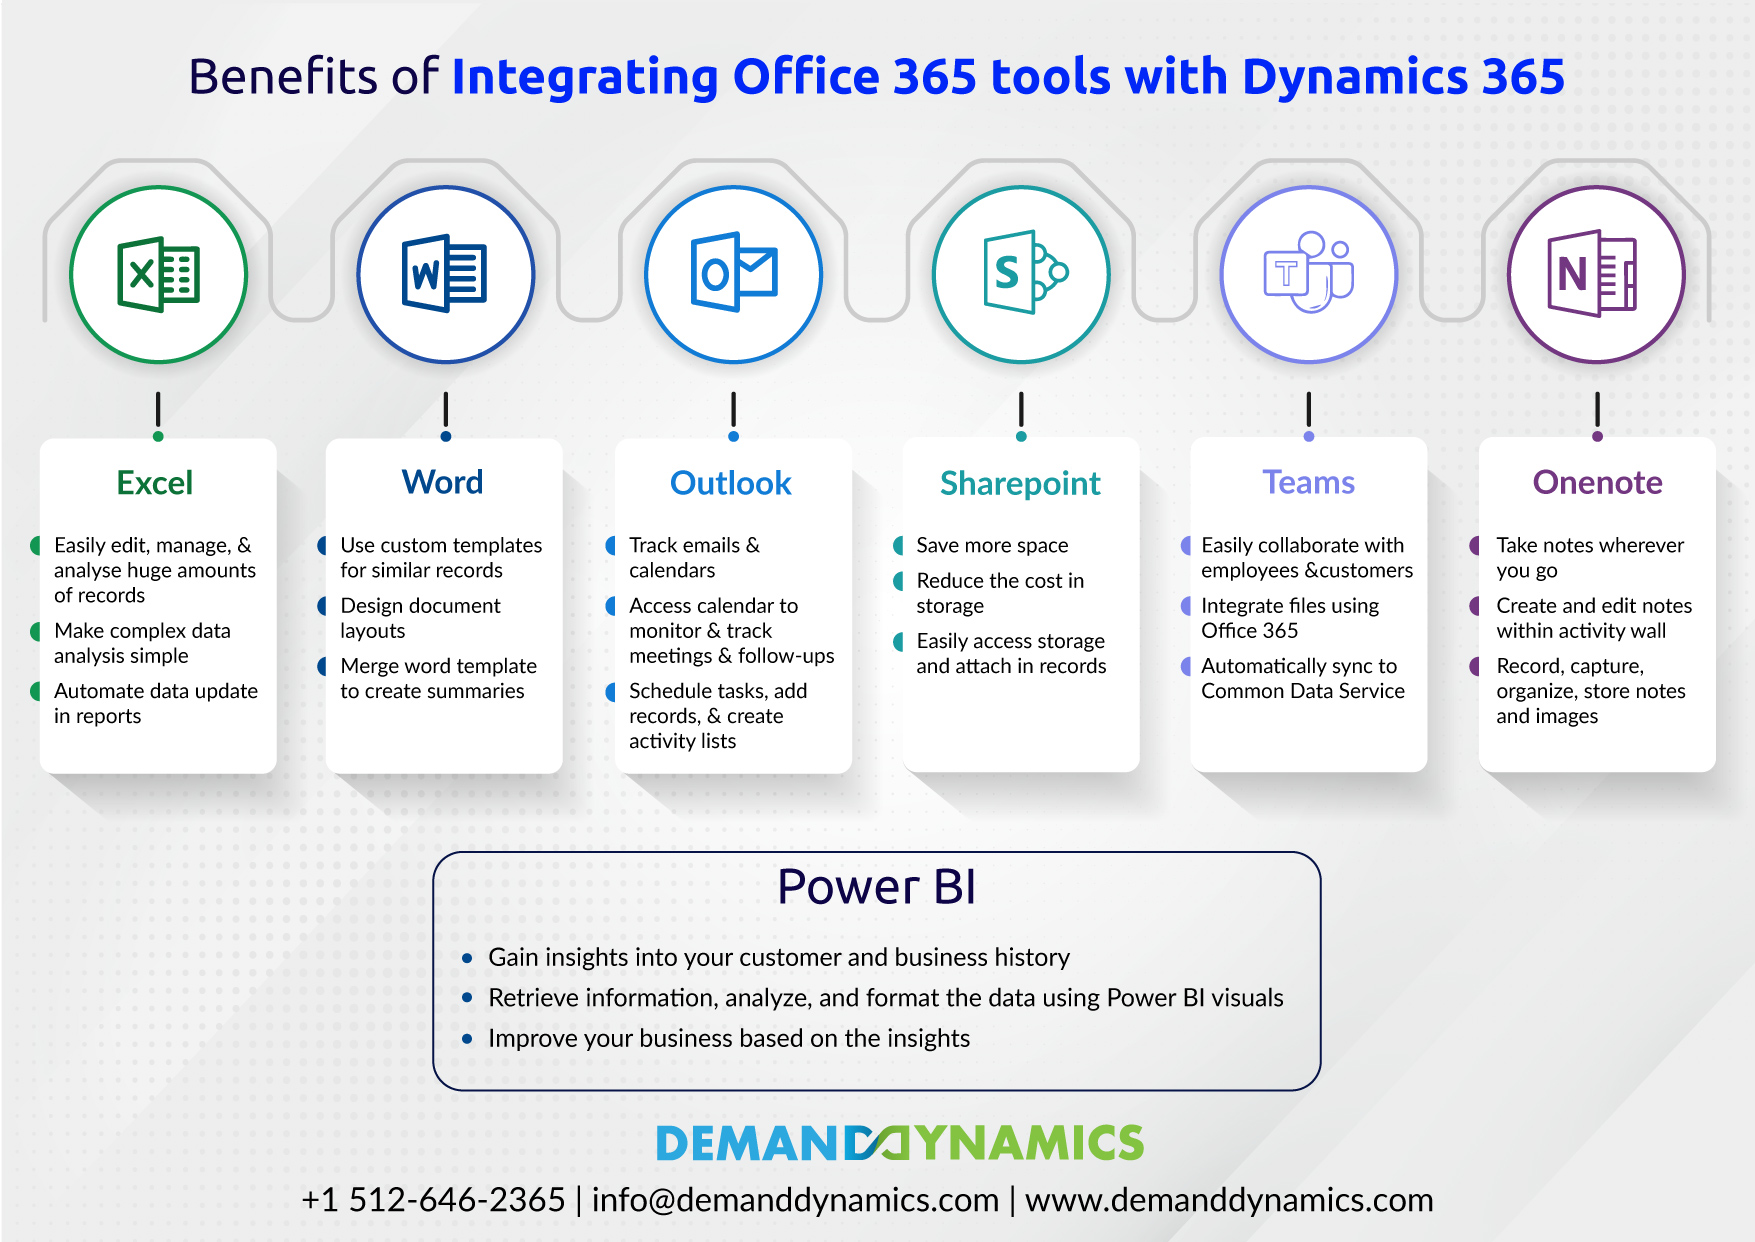 Integration of Office 365 with Dynamics 365